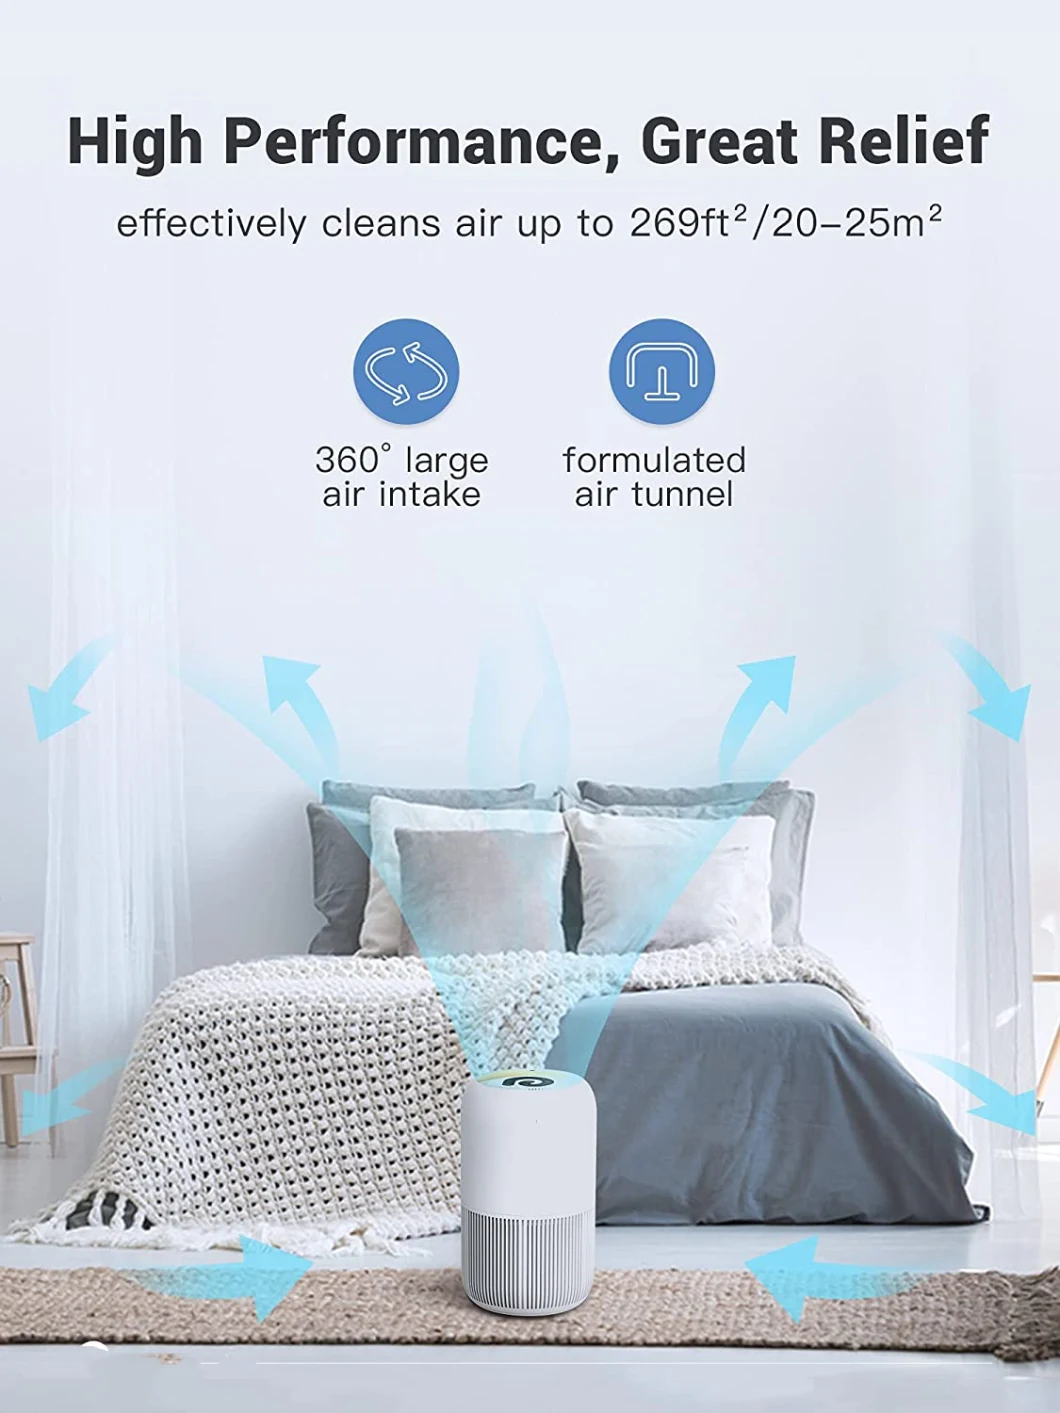 Home Portable Ture HEPA Filter Air Purifier